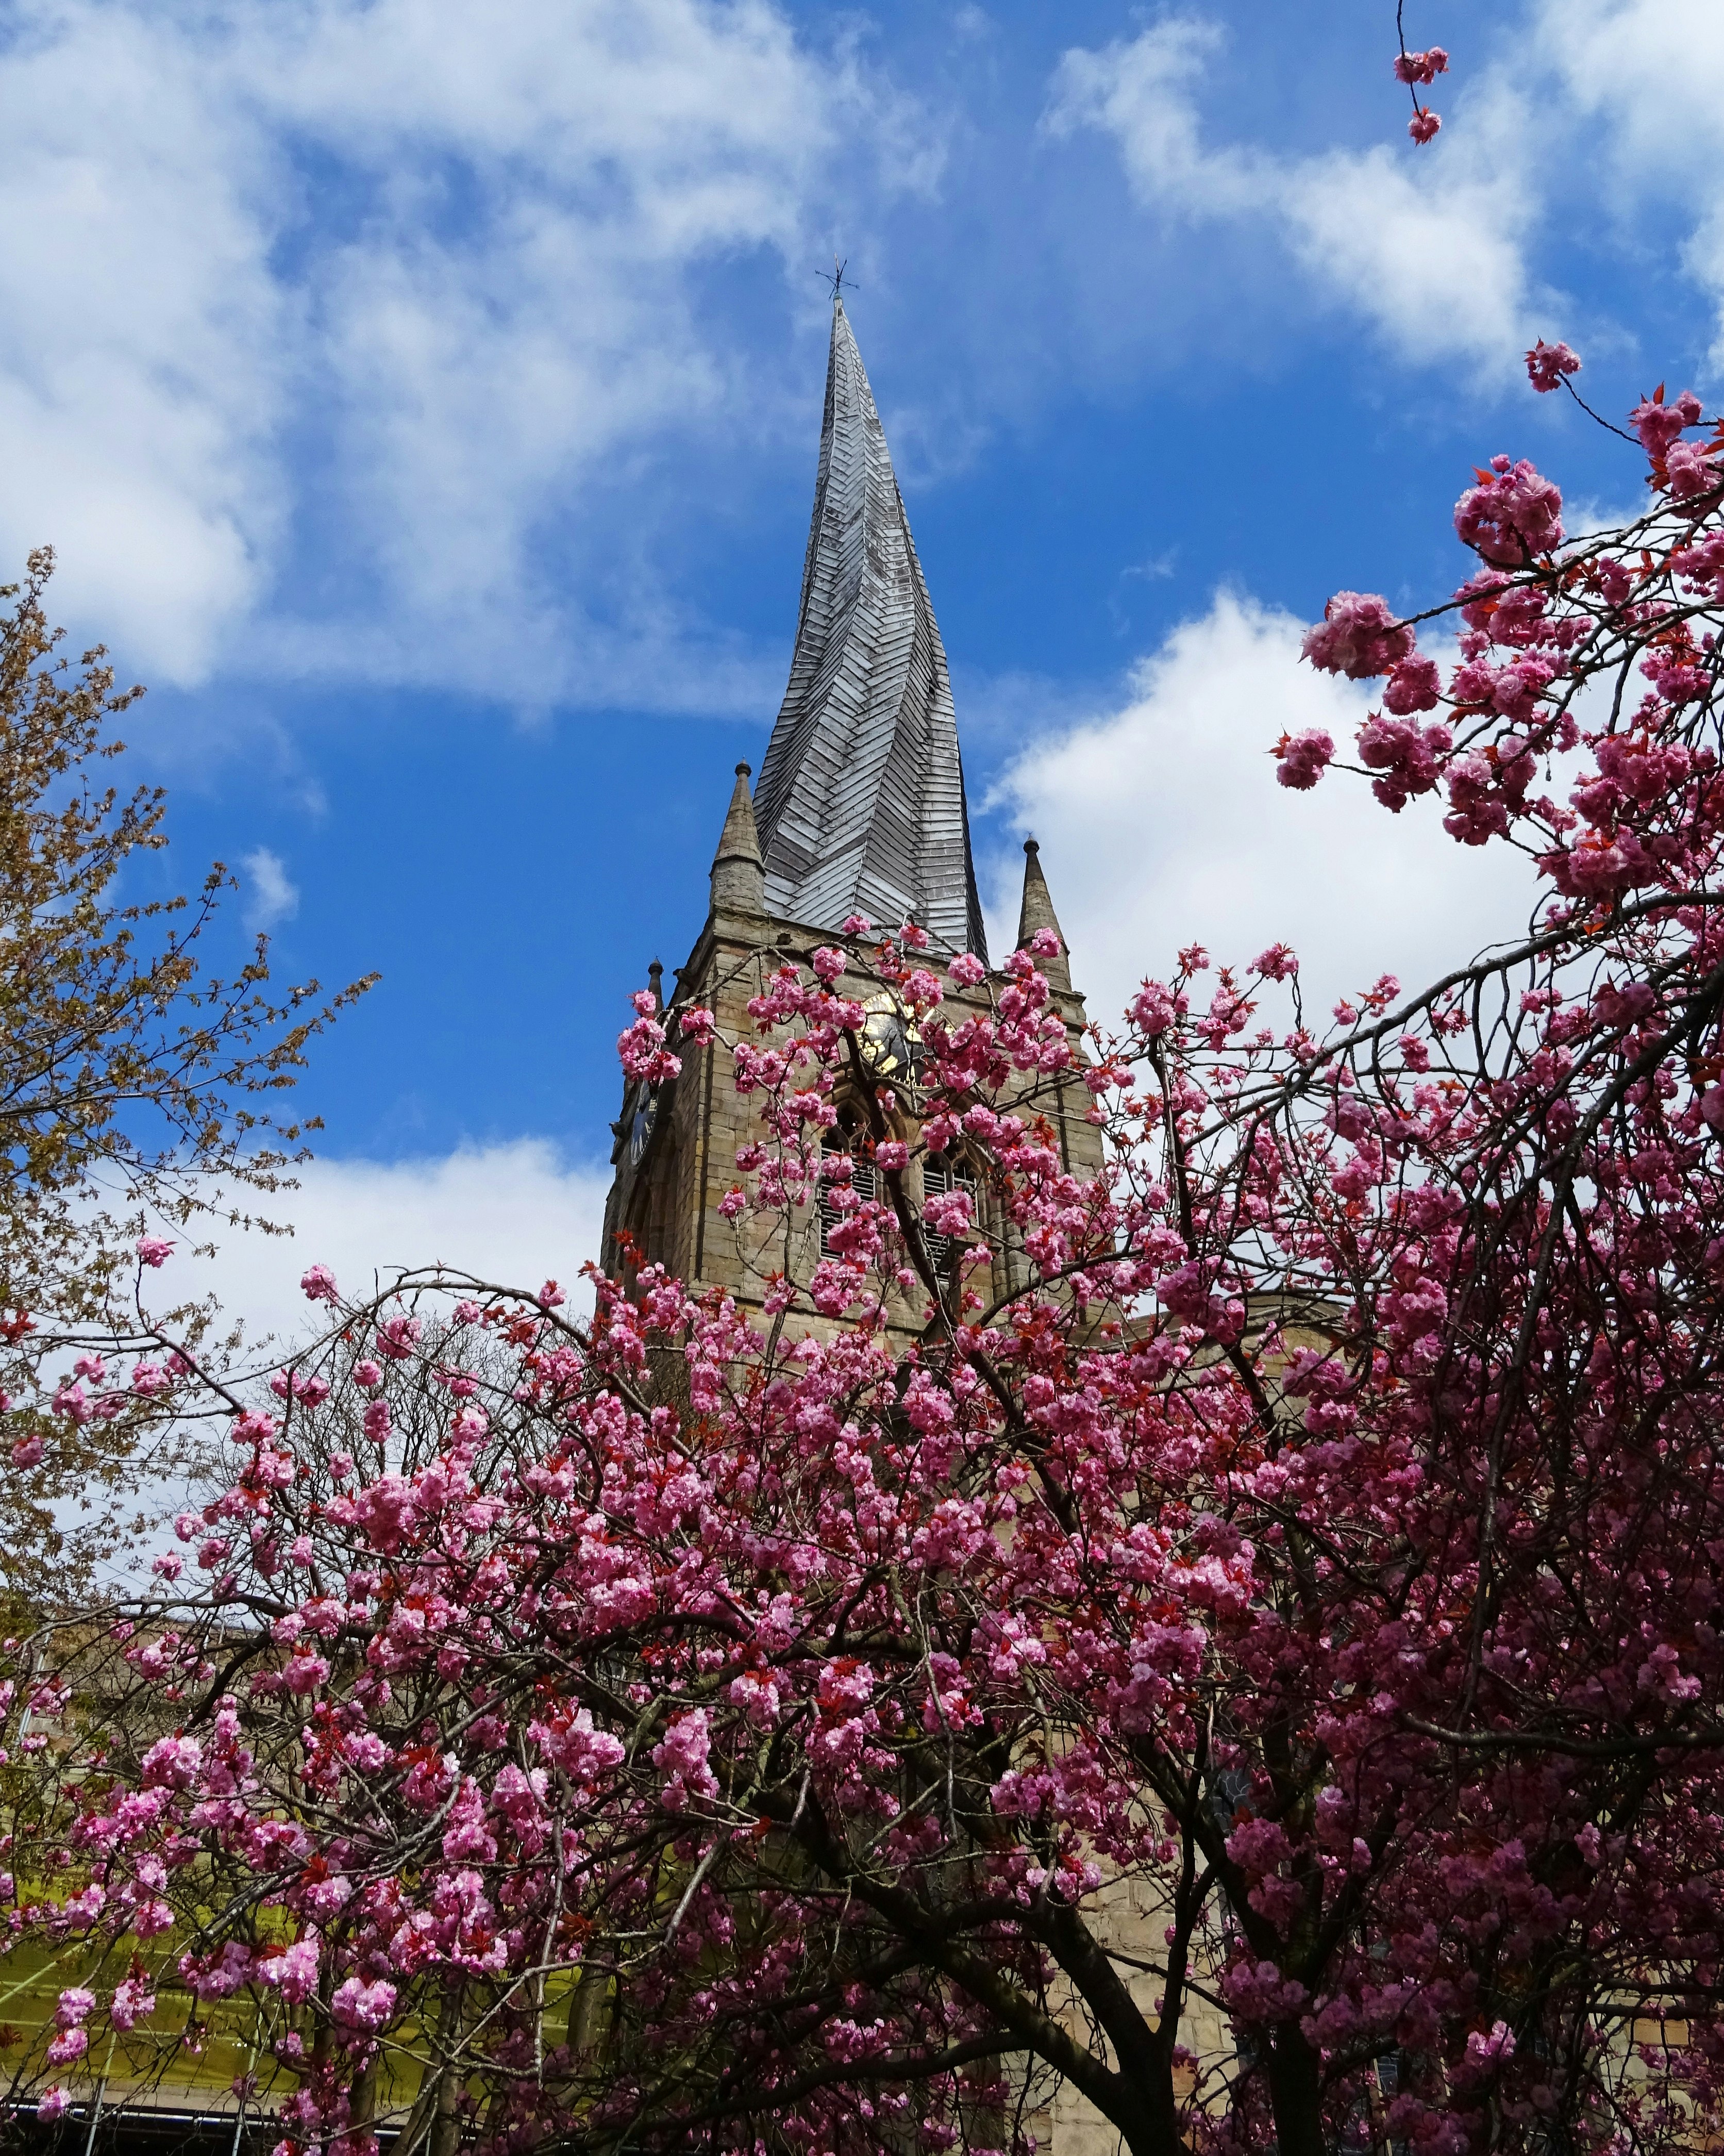 Chesterfield is famous for its twisted and distorted church spire.